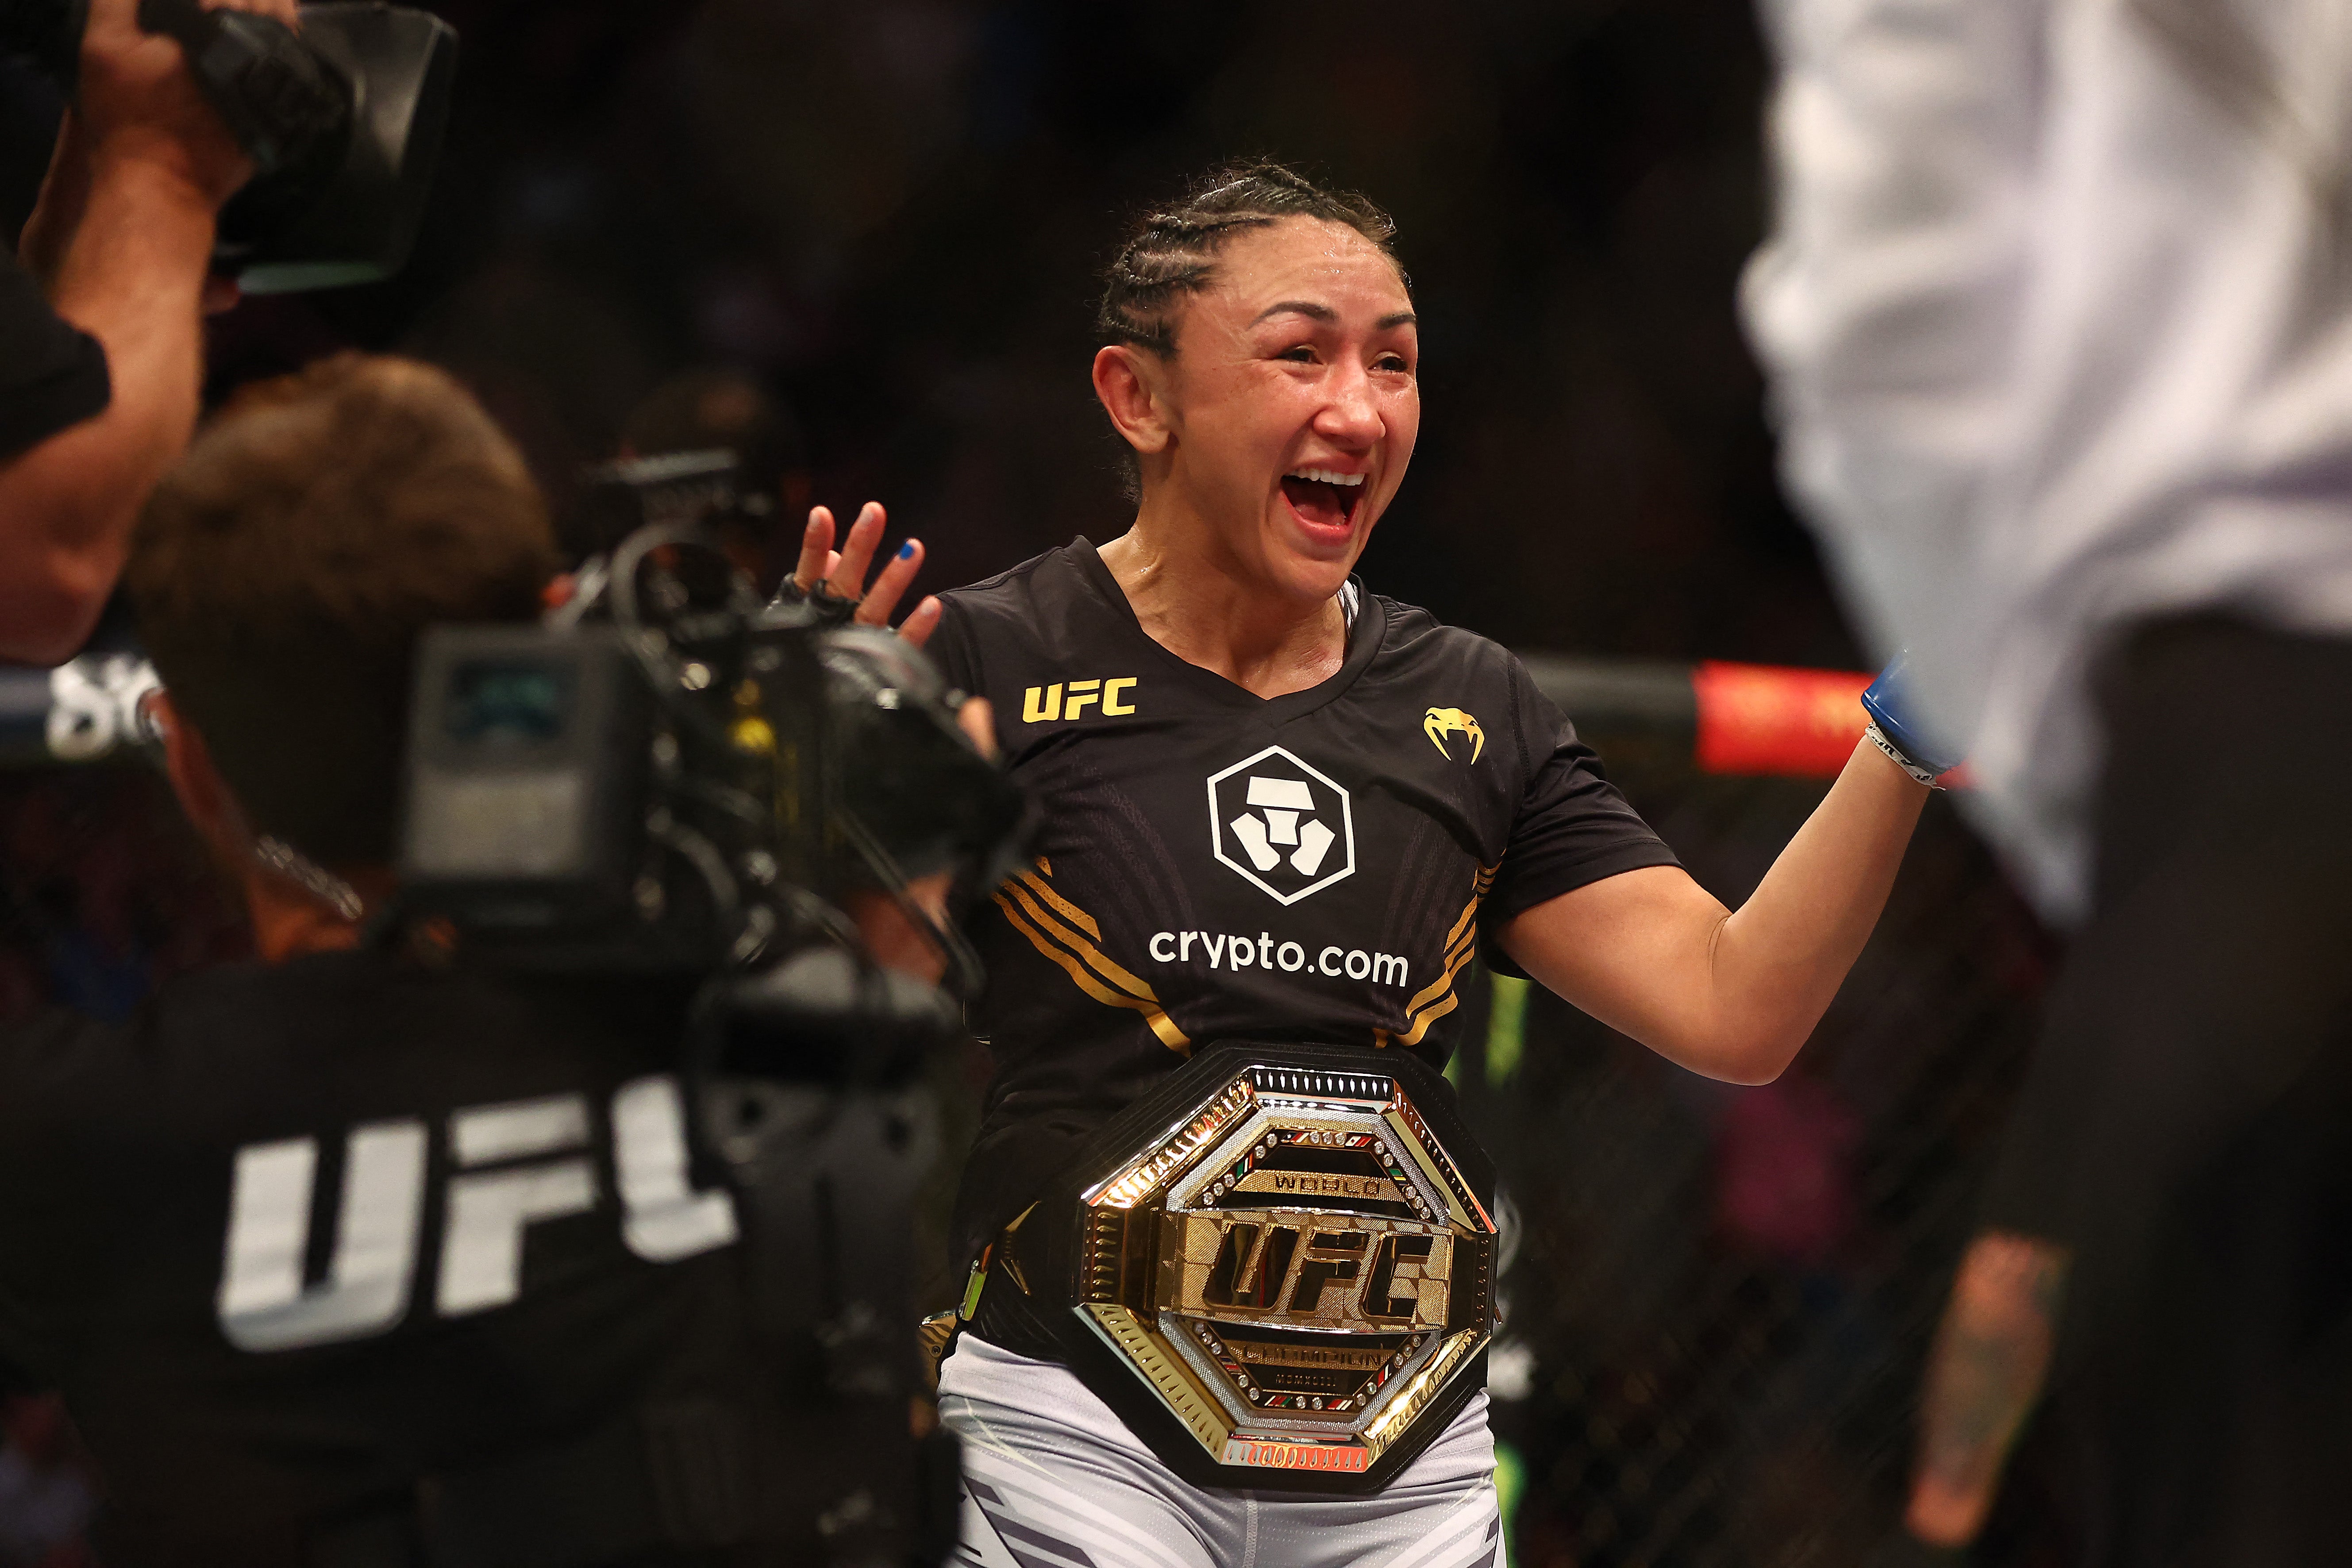 Esparza celebrates becoming a two-time UFC strawweight champion